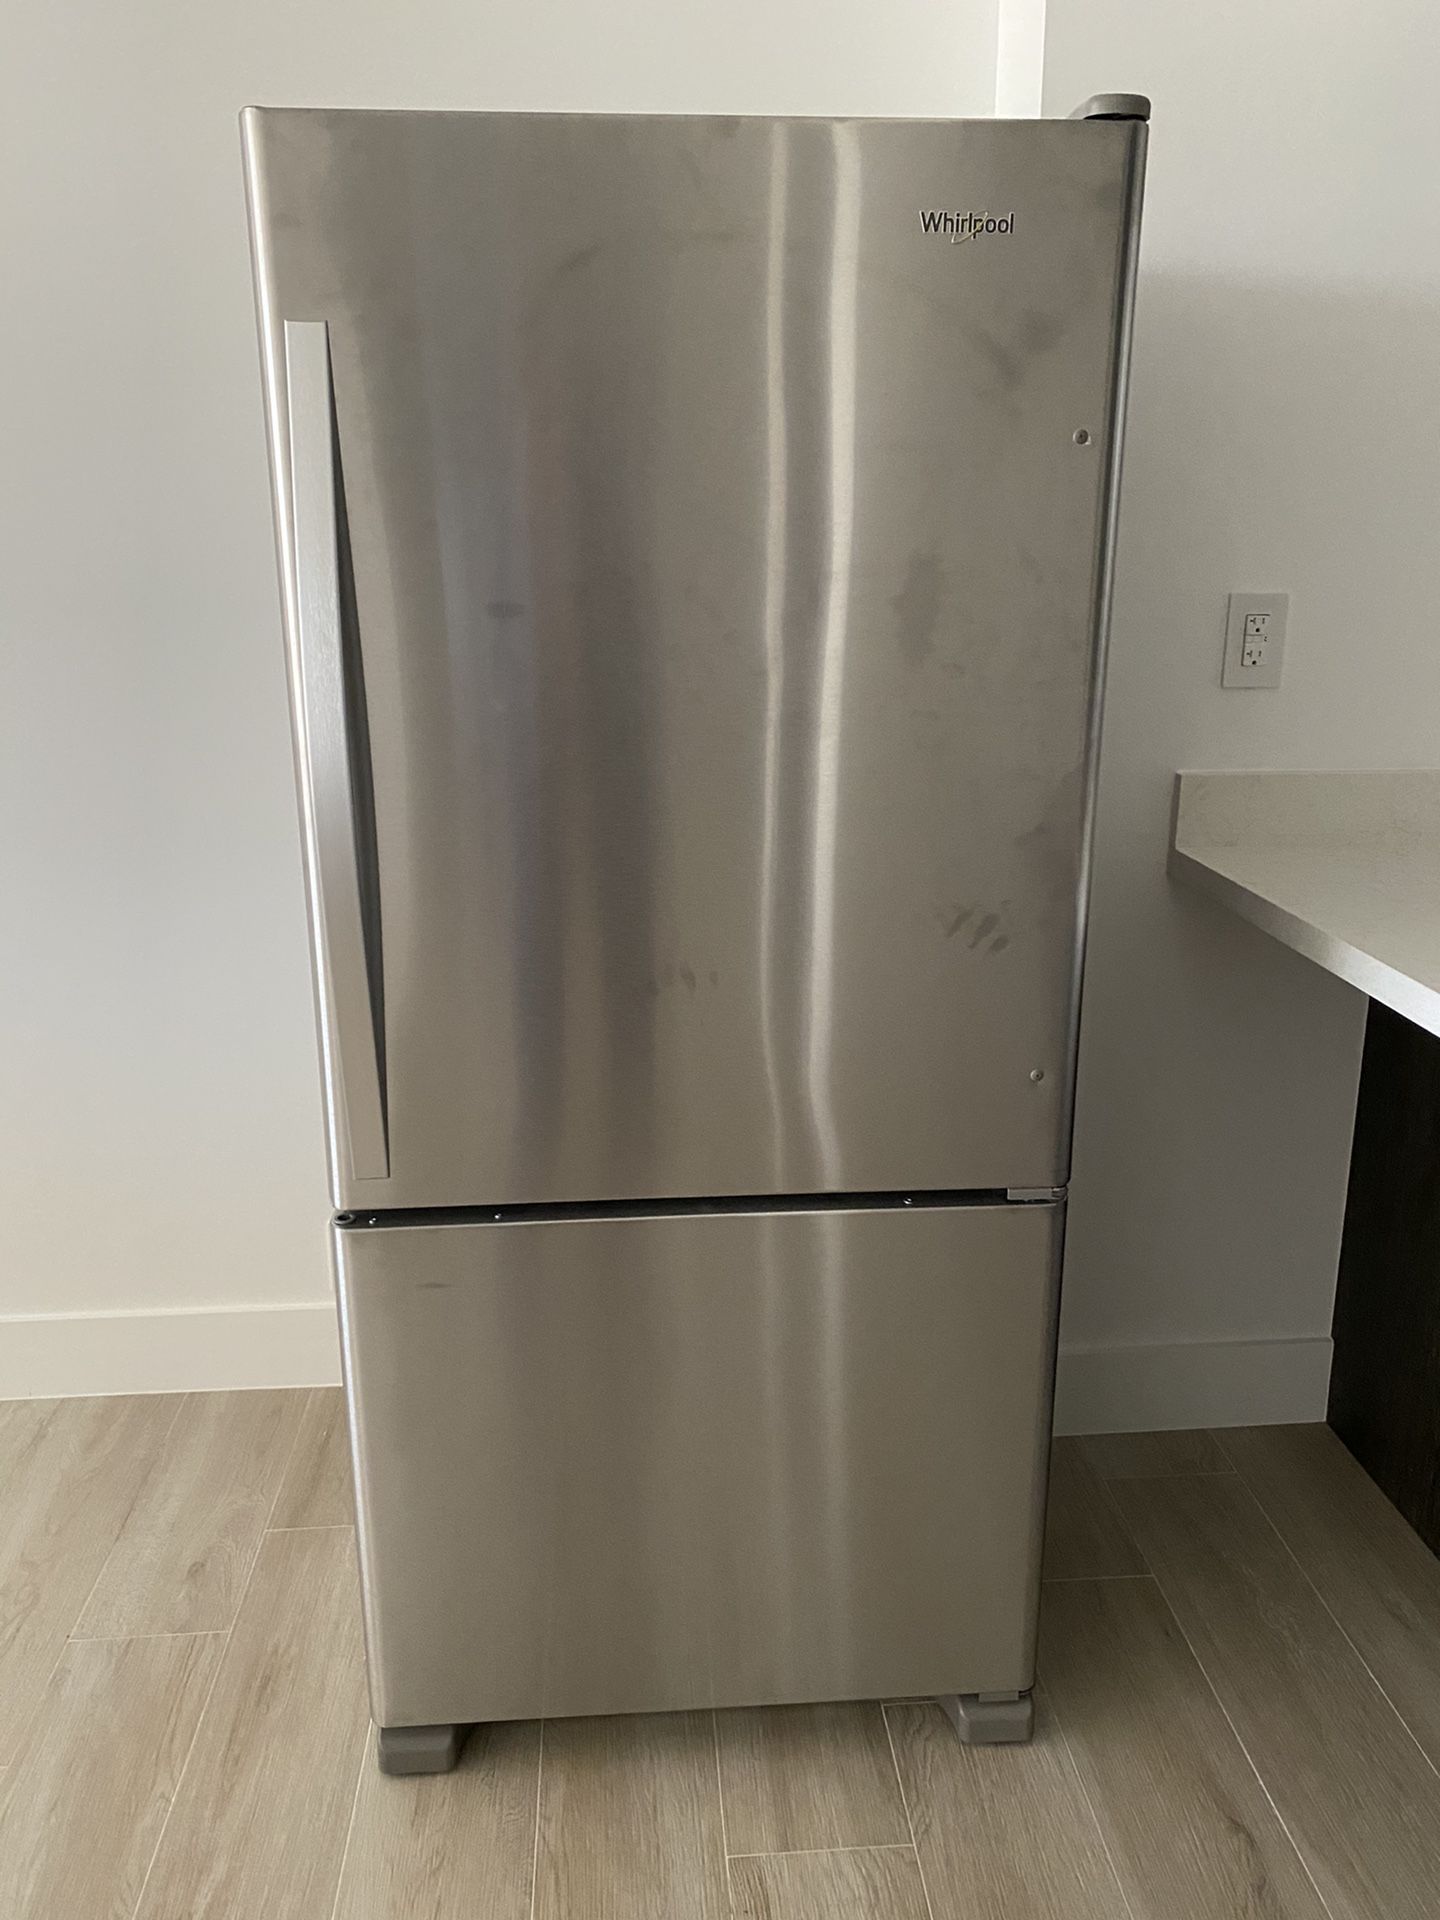 Last Day Offer!! Never Used Refrigerator whirlpool Offers May Be Accepted